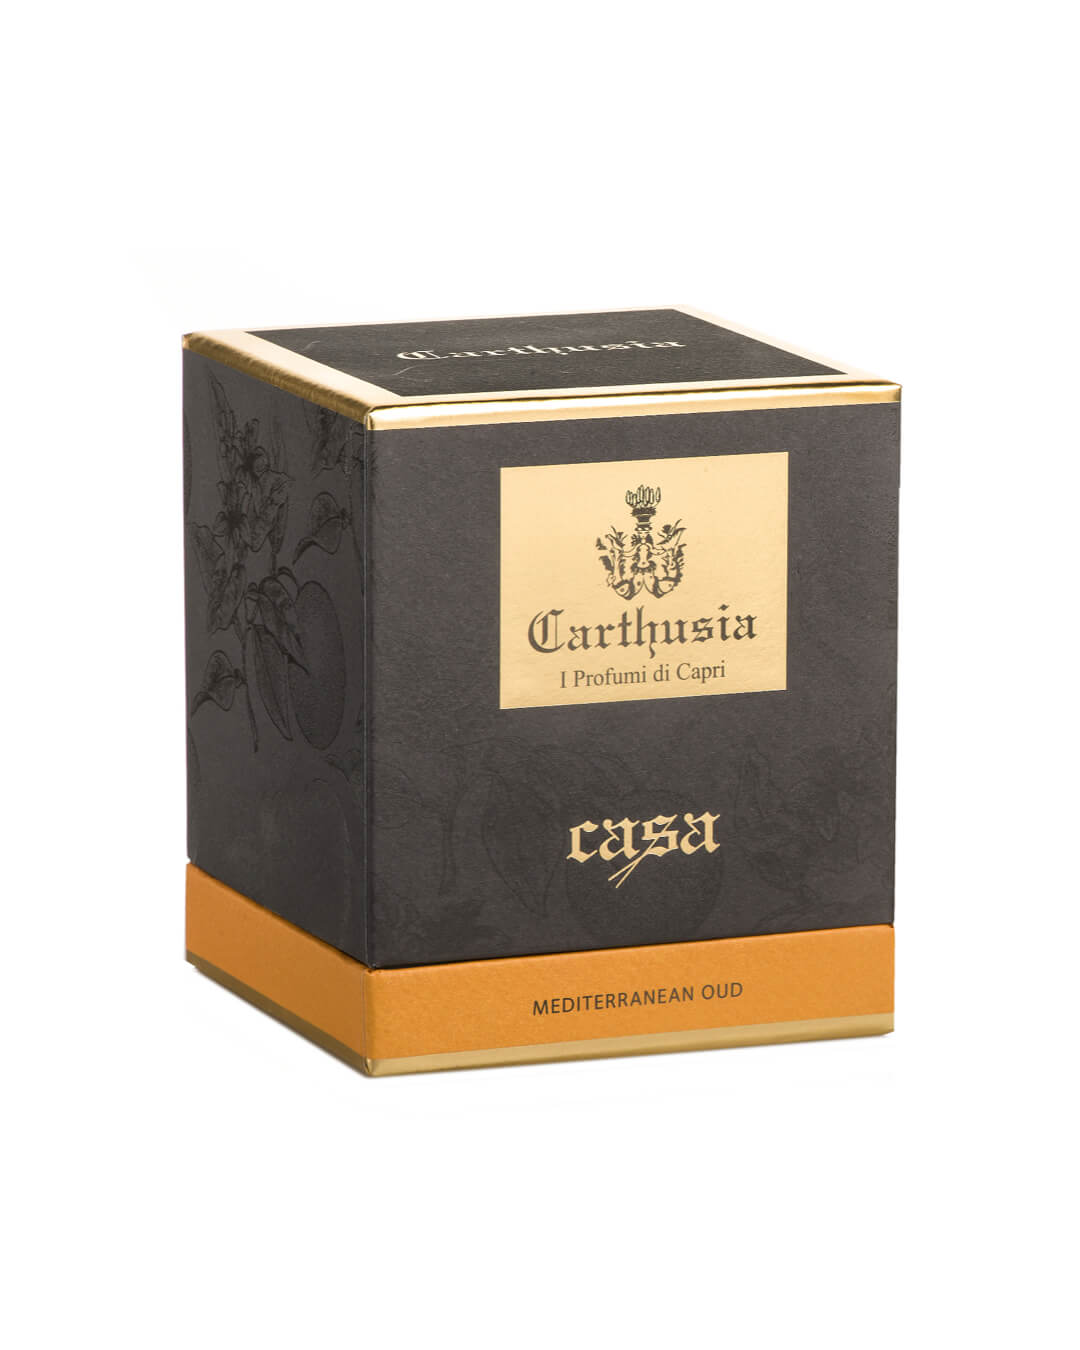 Carthusia Mediterranean Oud Citrus scented candle Promotion 260gr promotion